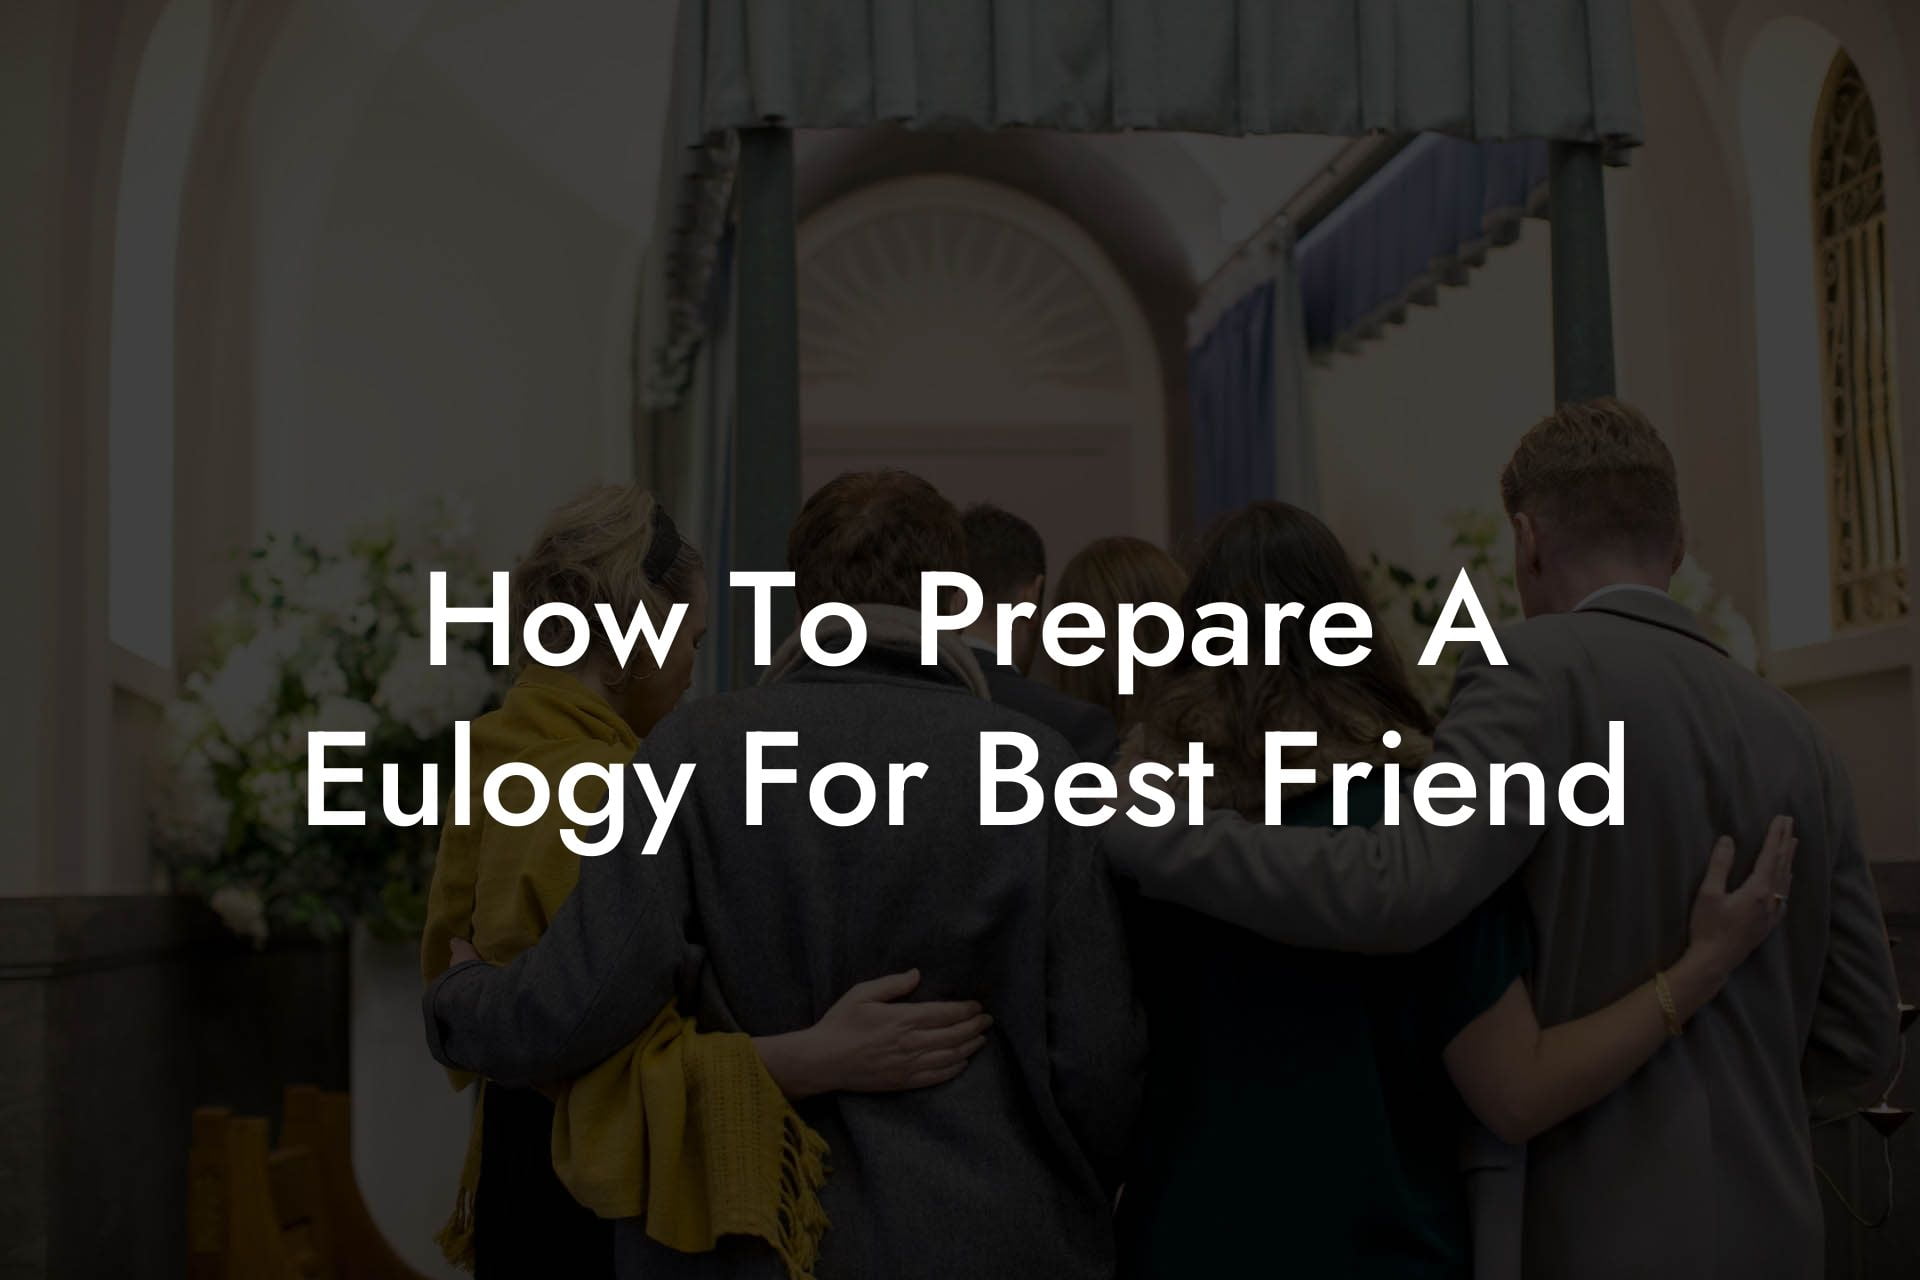 How To Prepare A Eulogy For Best Friend